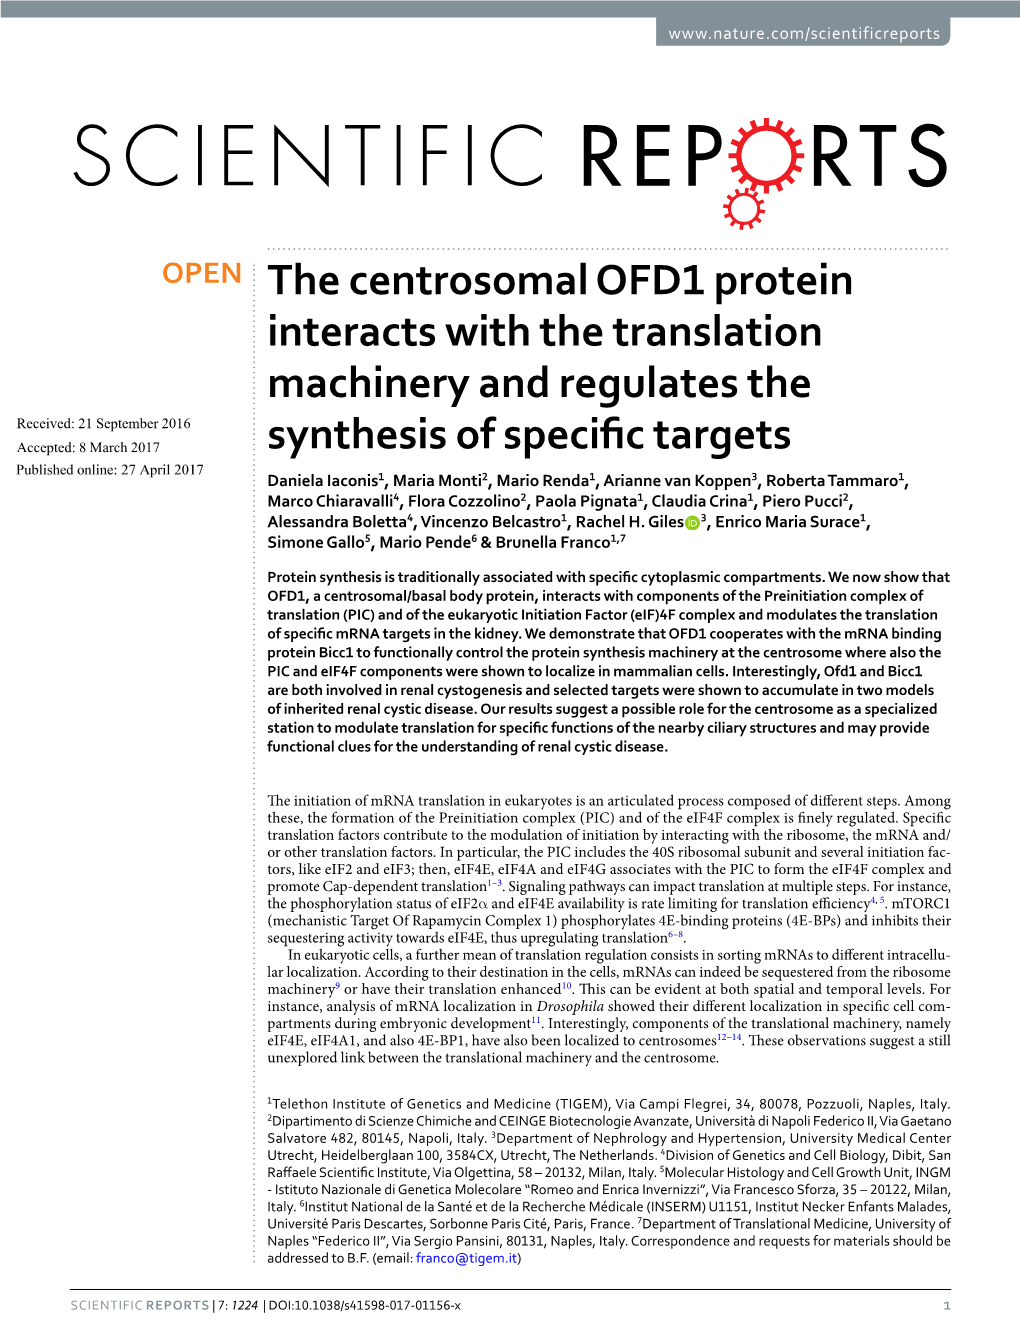 The Centrosomal OFD1 Protein Interacts with the Translation